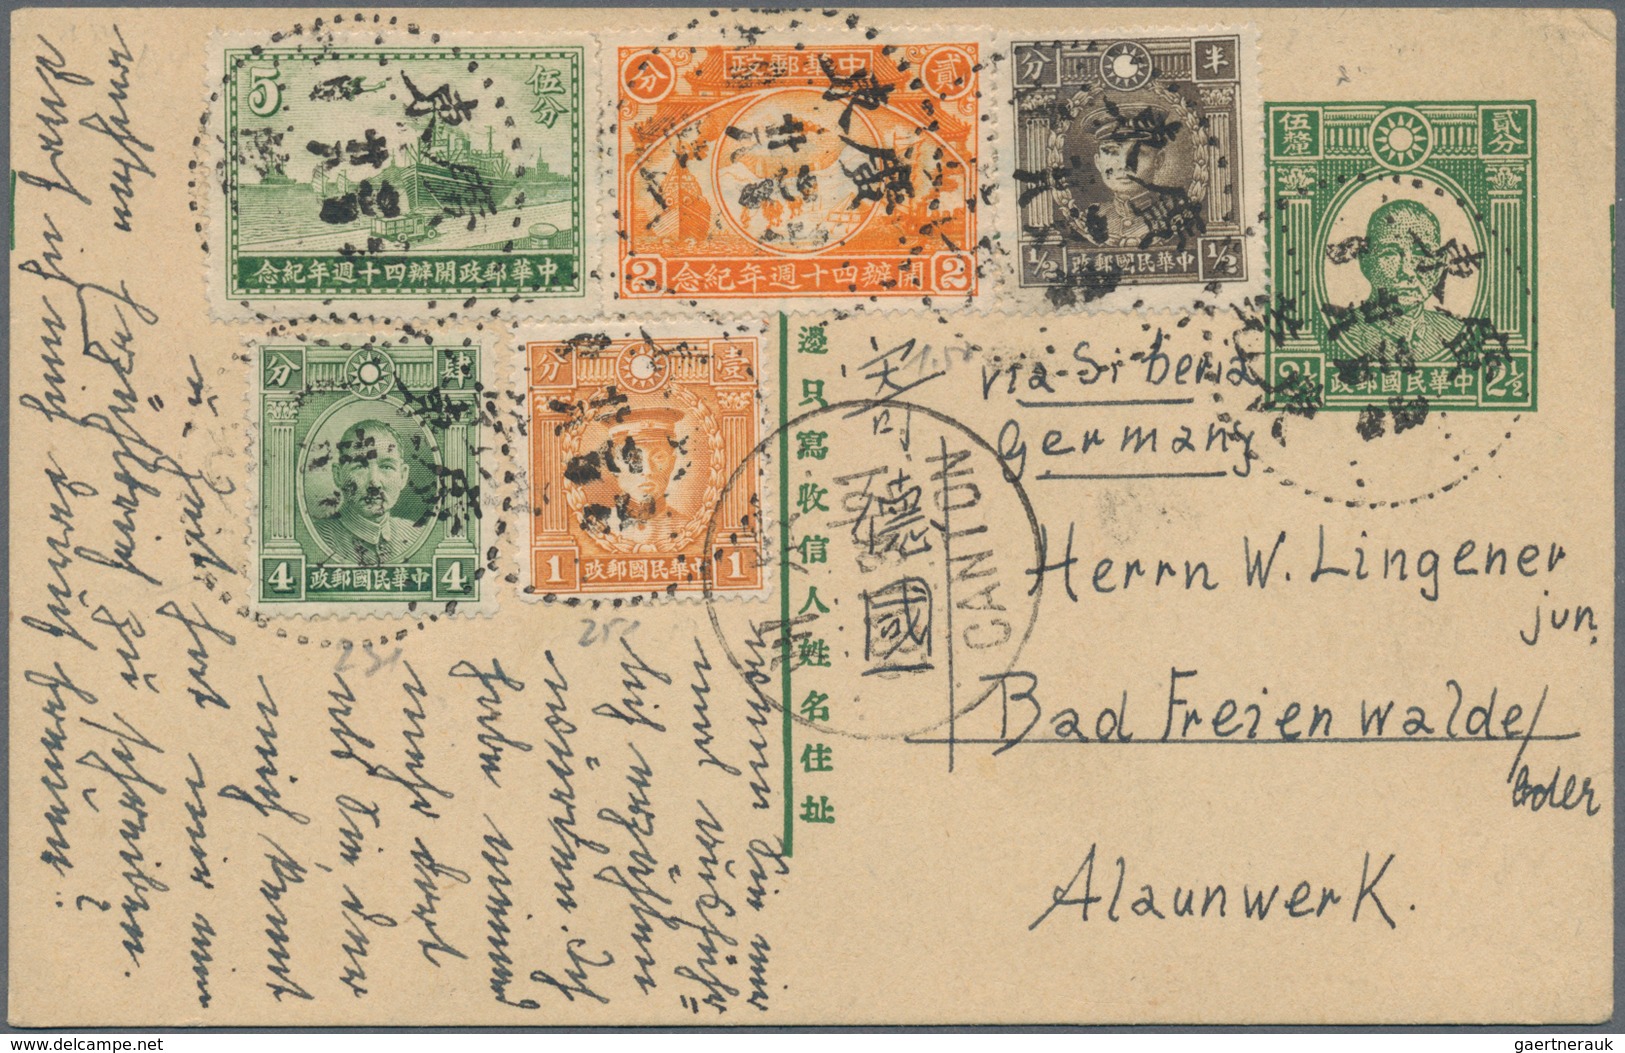 China - Ganzsachen: 1912/36, four cards with Kwangtung boxed daters: flag 1 C. (2) used "Hoshanhsien